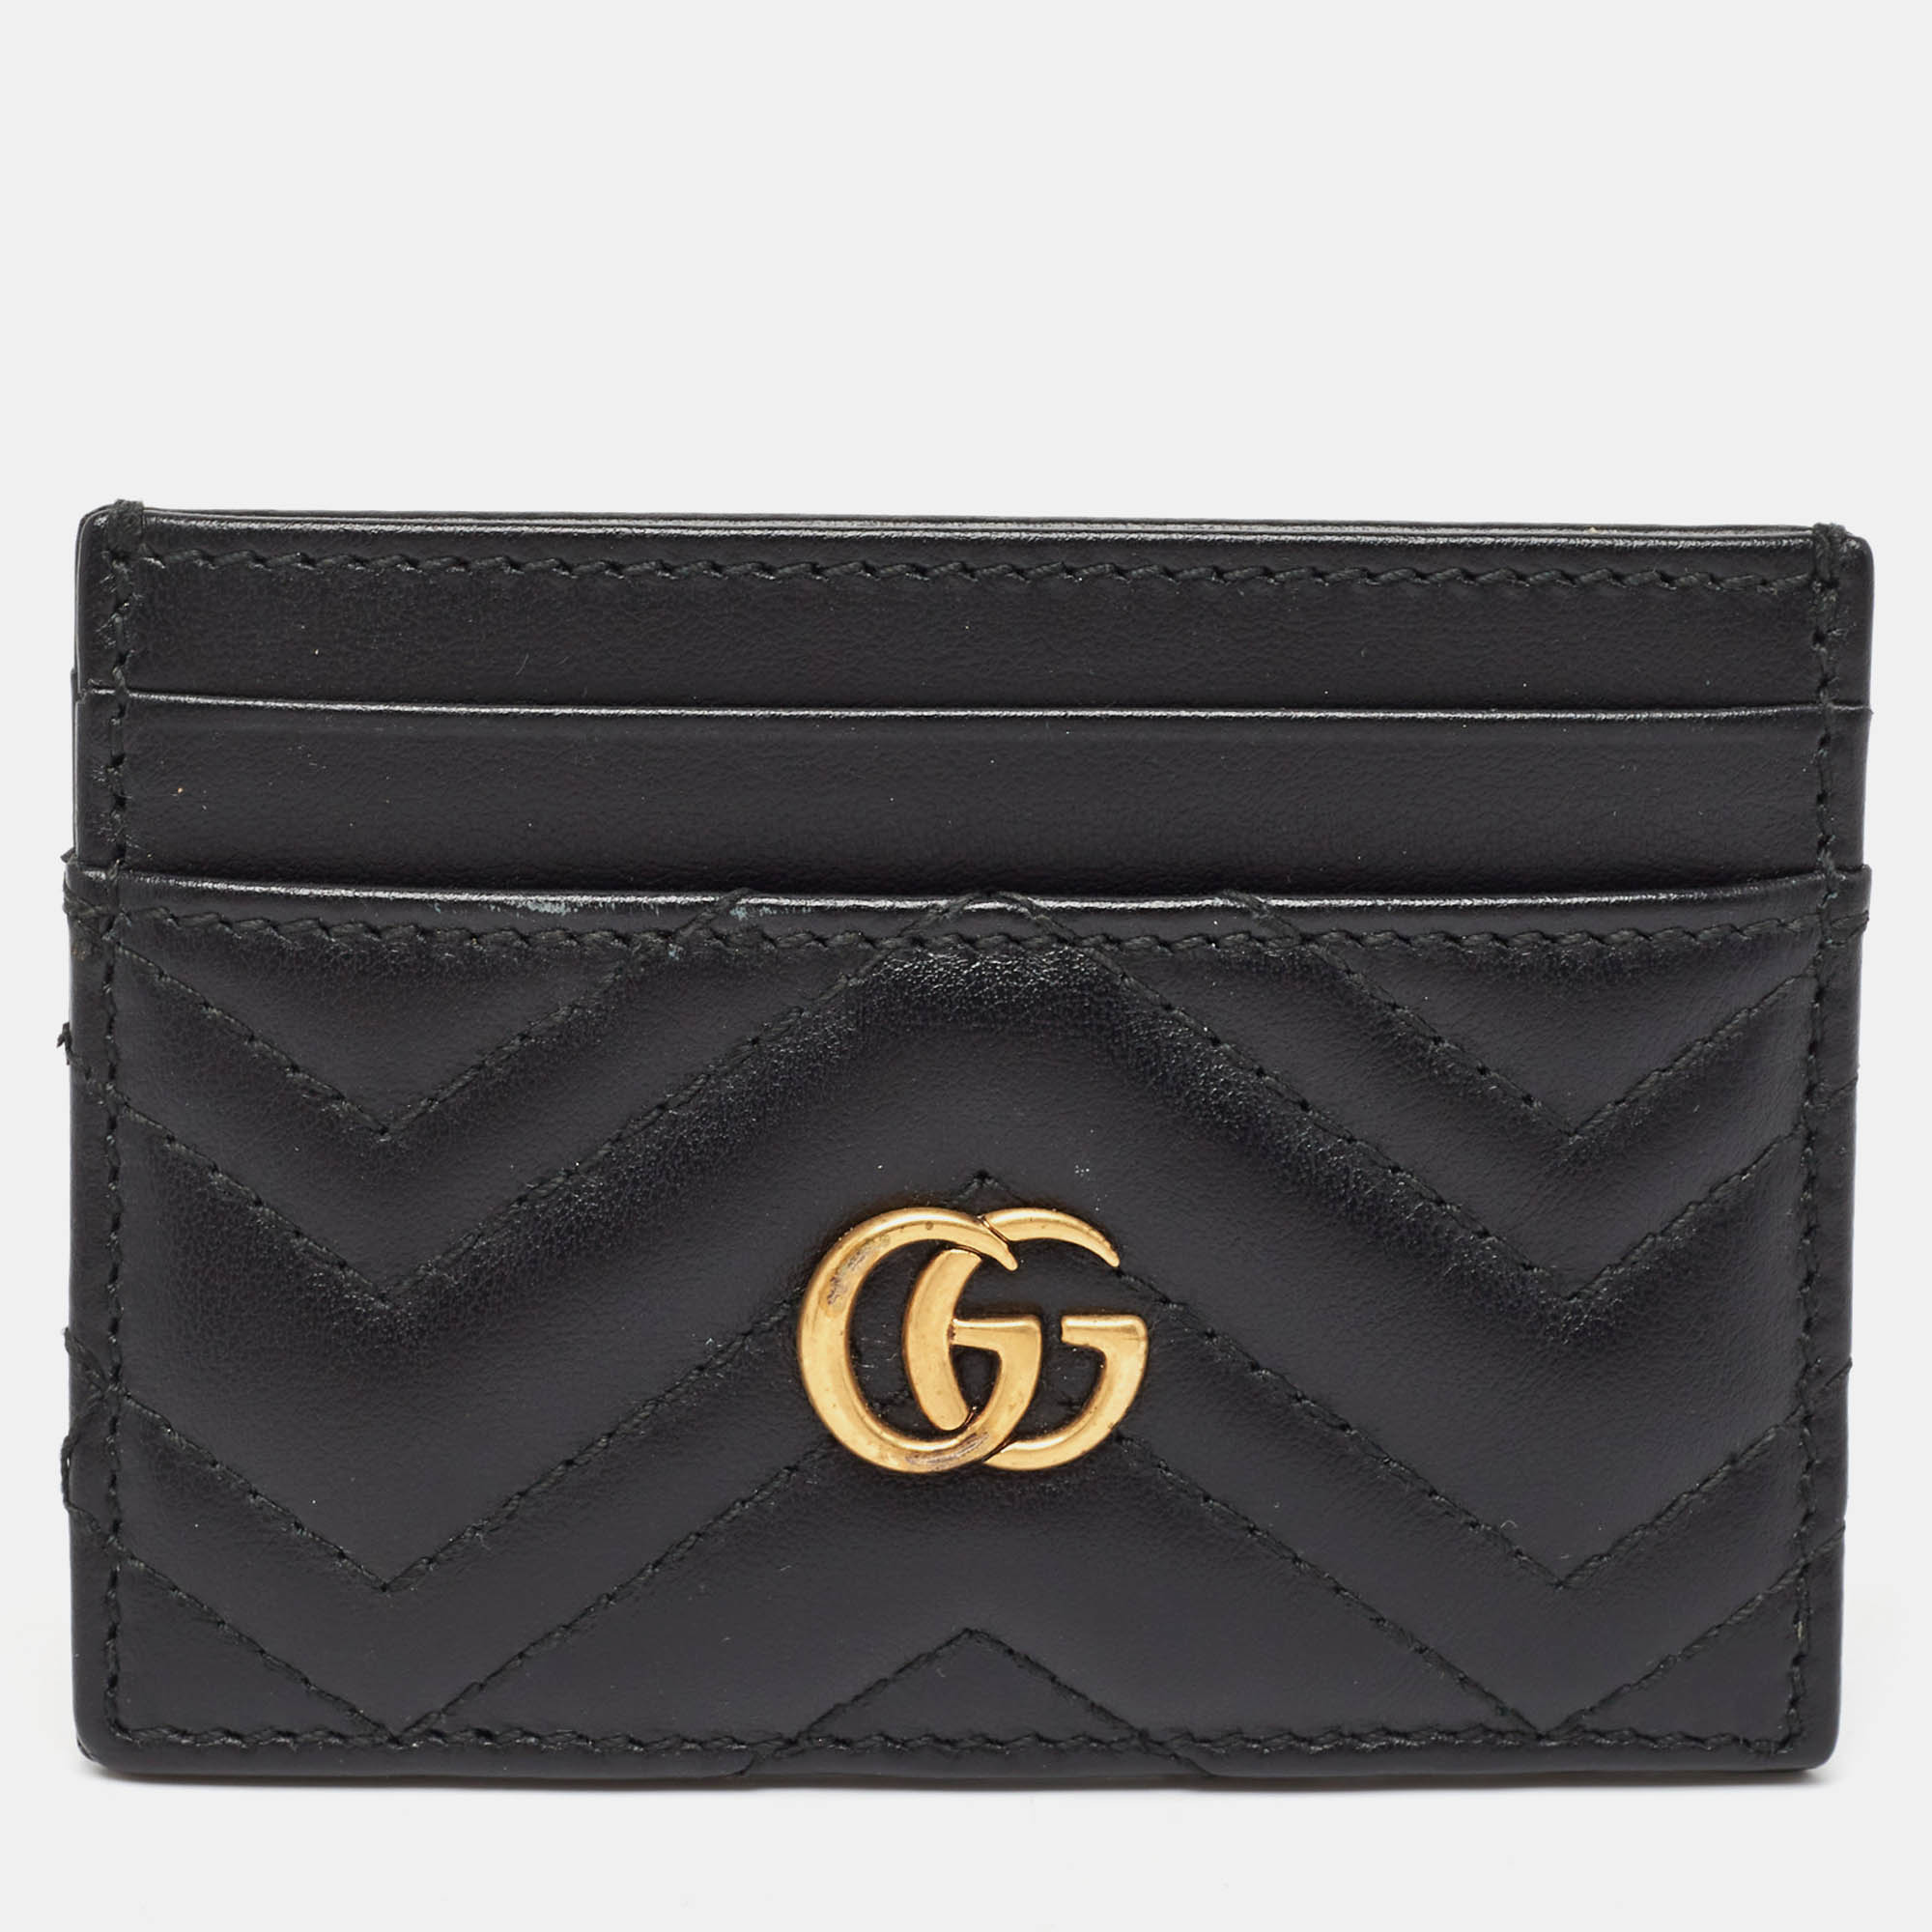 Pre-owned Gucci Black Matelassé Leather Gg Marmont Card Holder